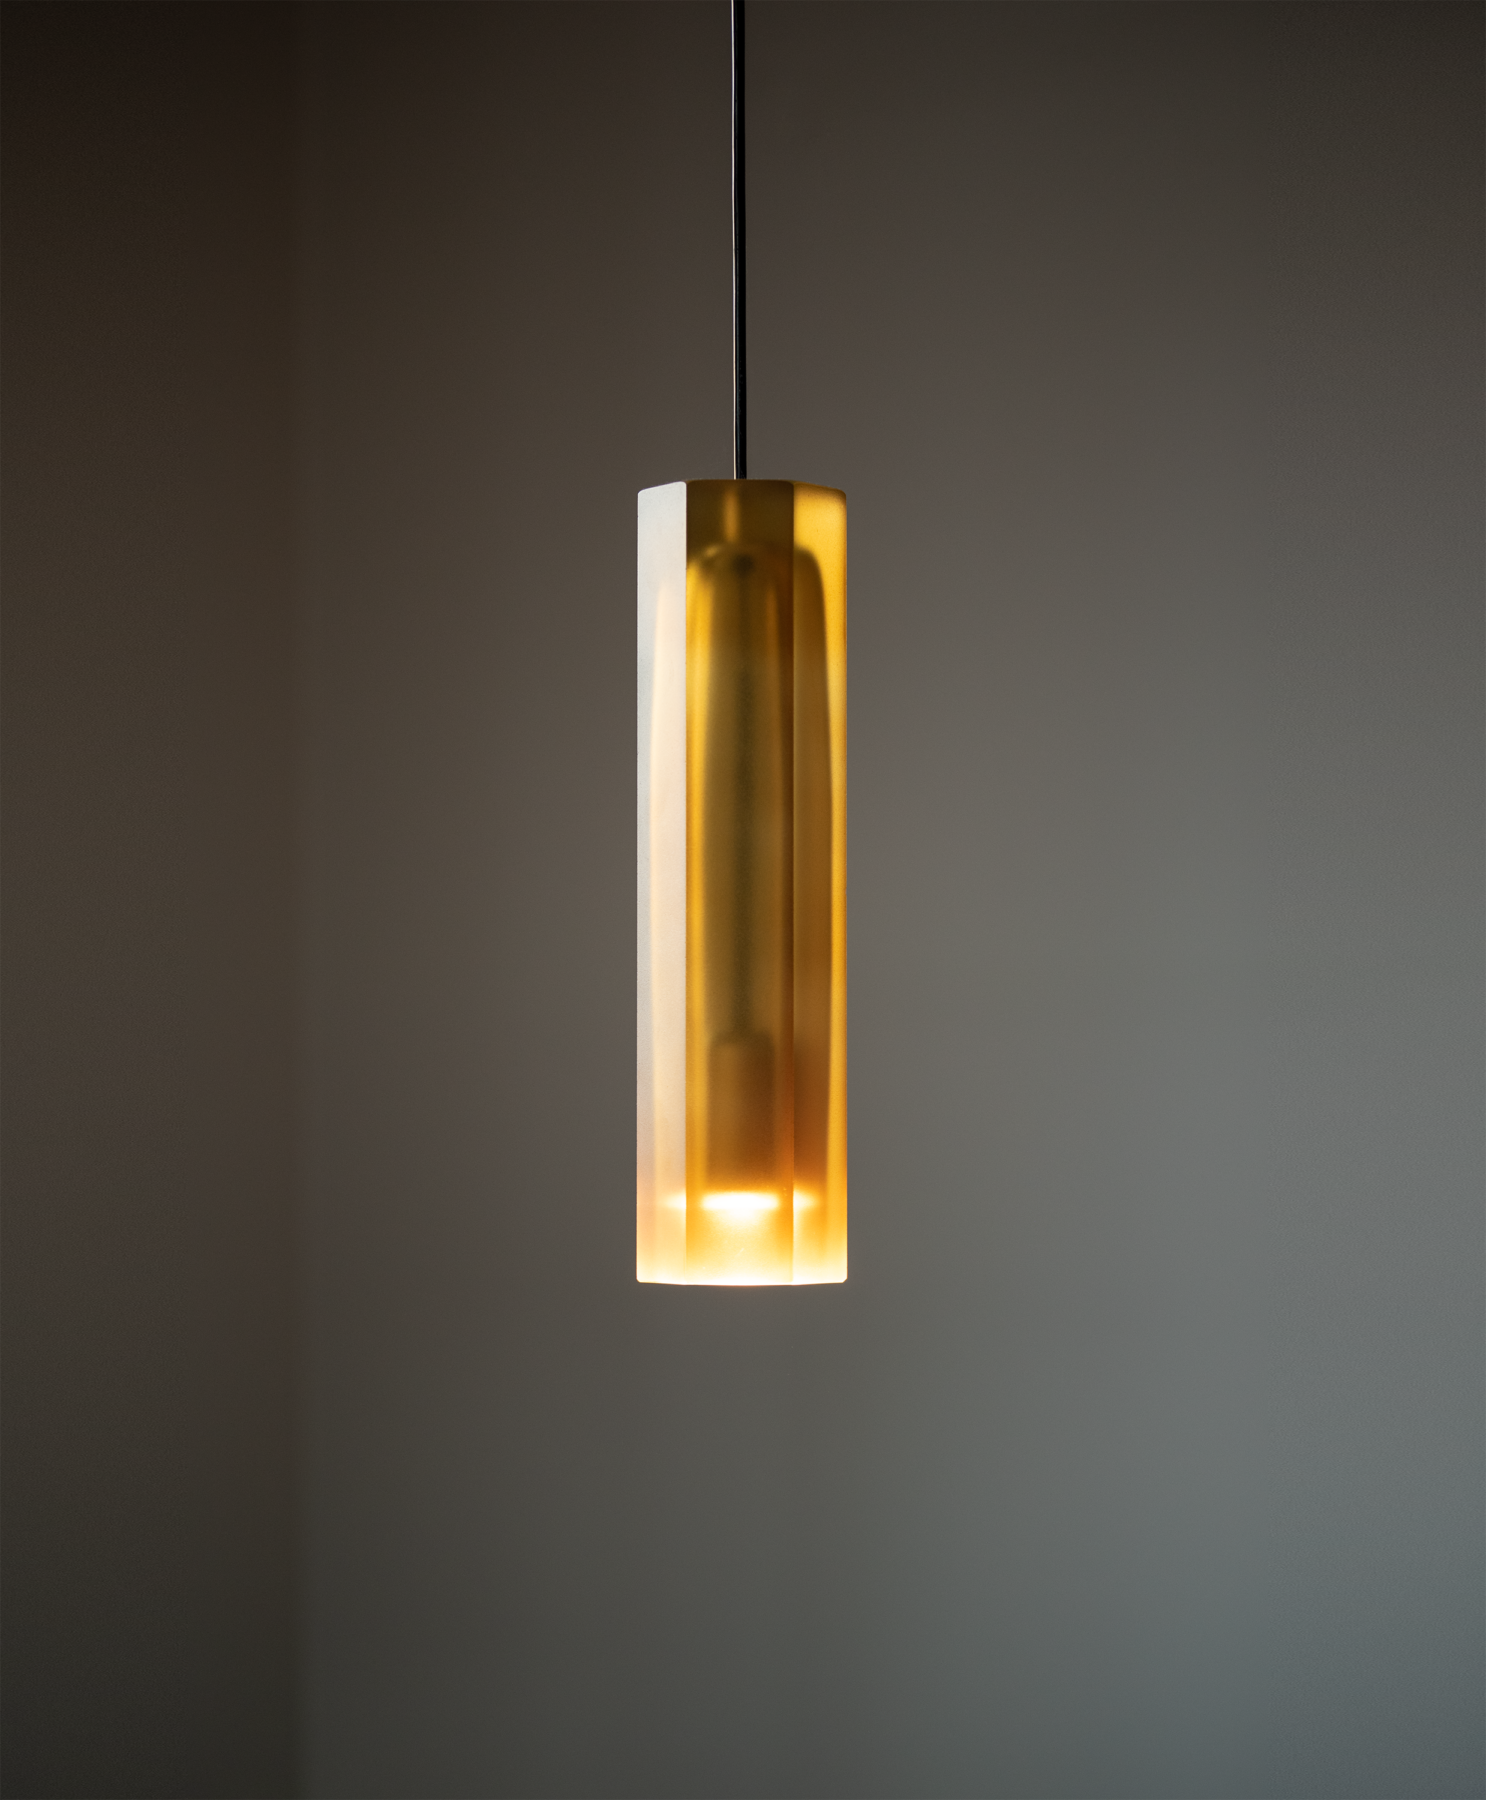 HON honey-colored hexagonal glass lamp with recessed LED.